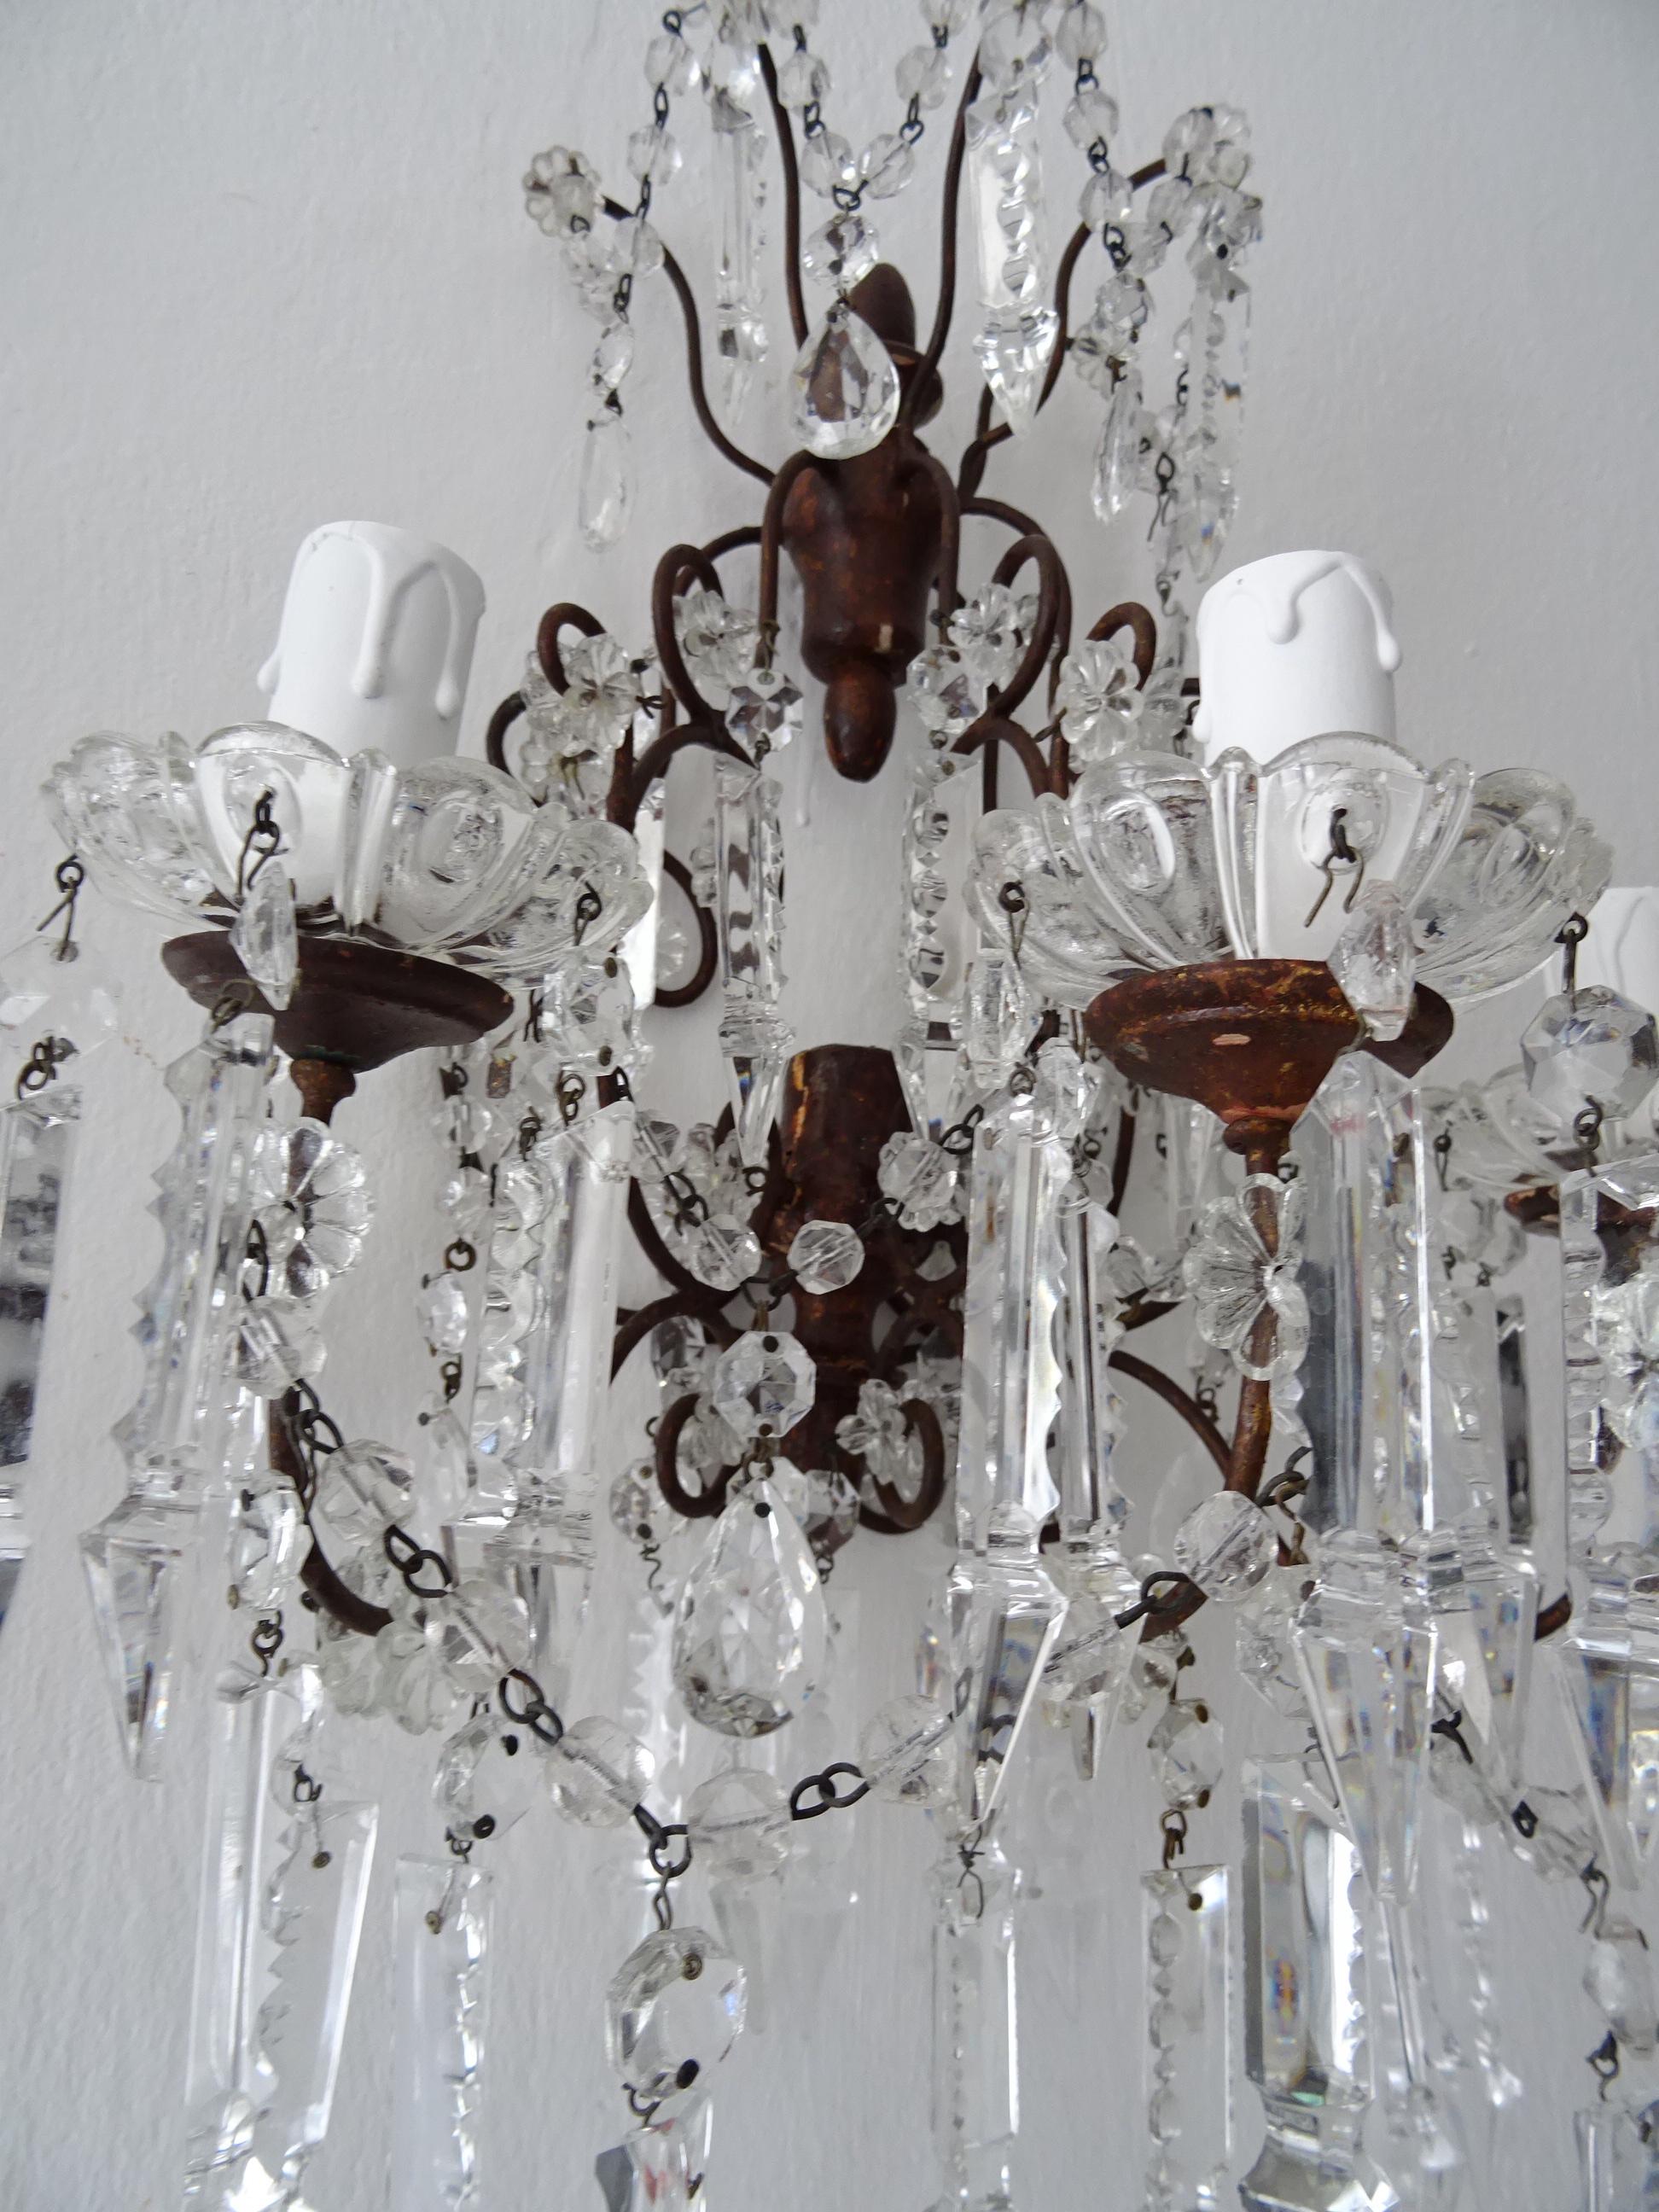 Big French Baroque Loaded Crystal Spears Prisms 3 Light  Sconces c 1900 For Sale 7